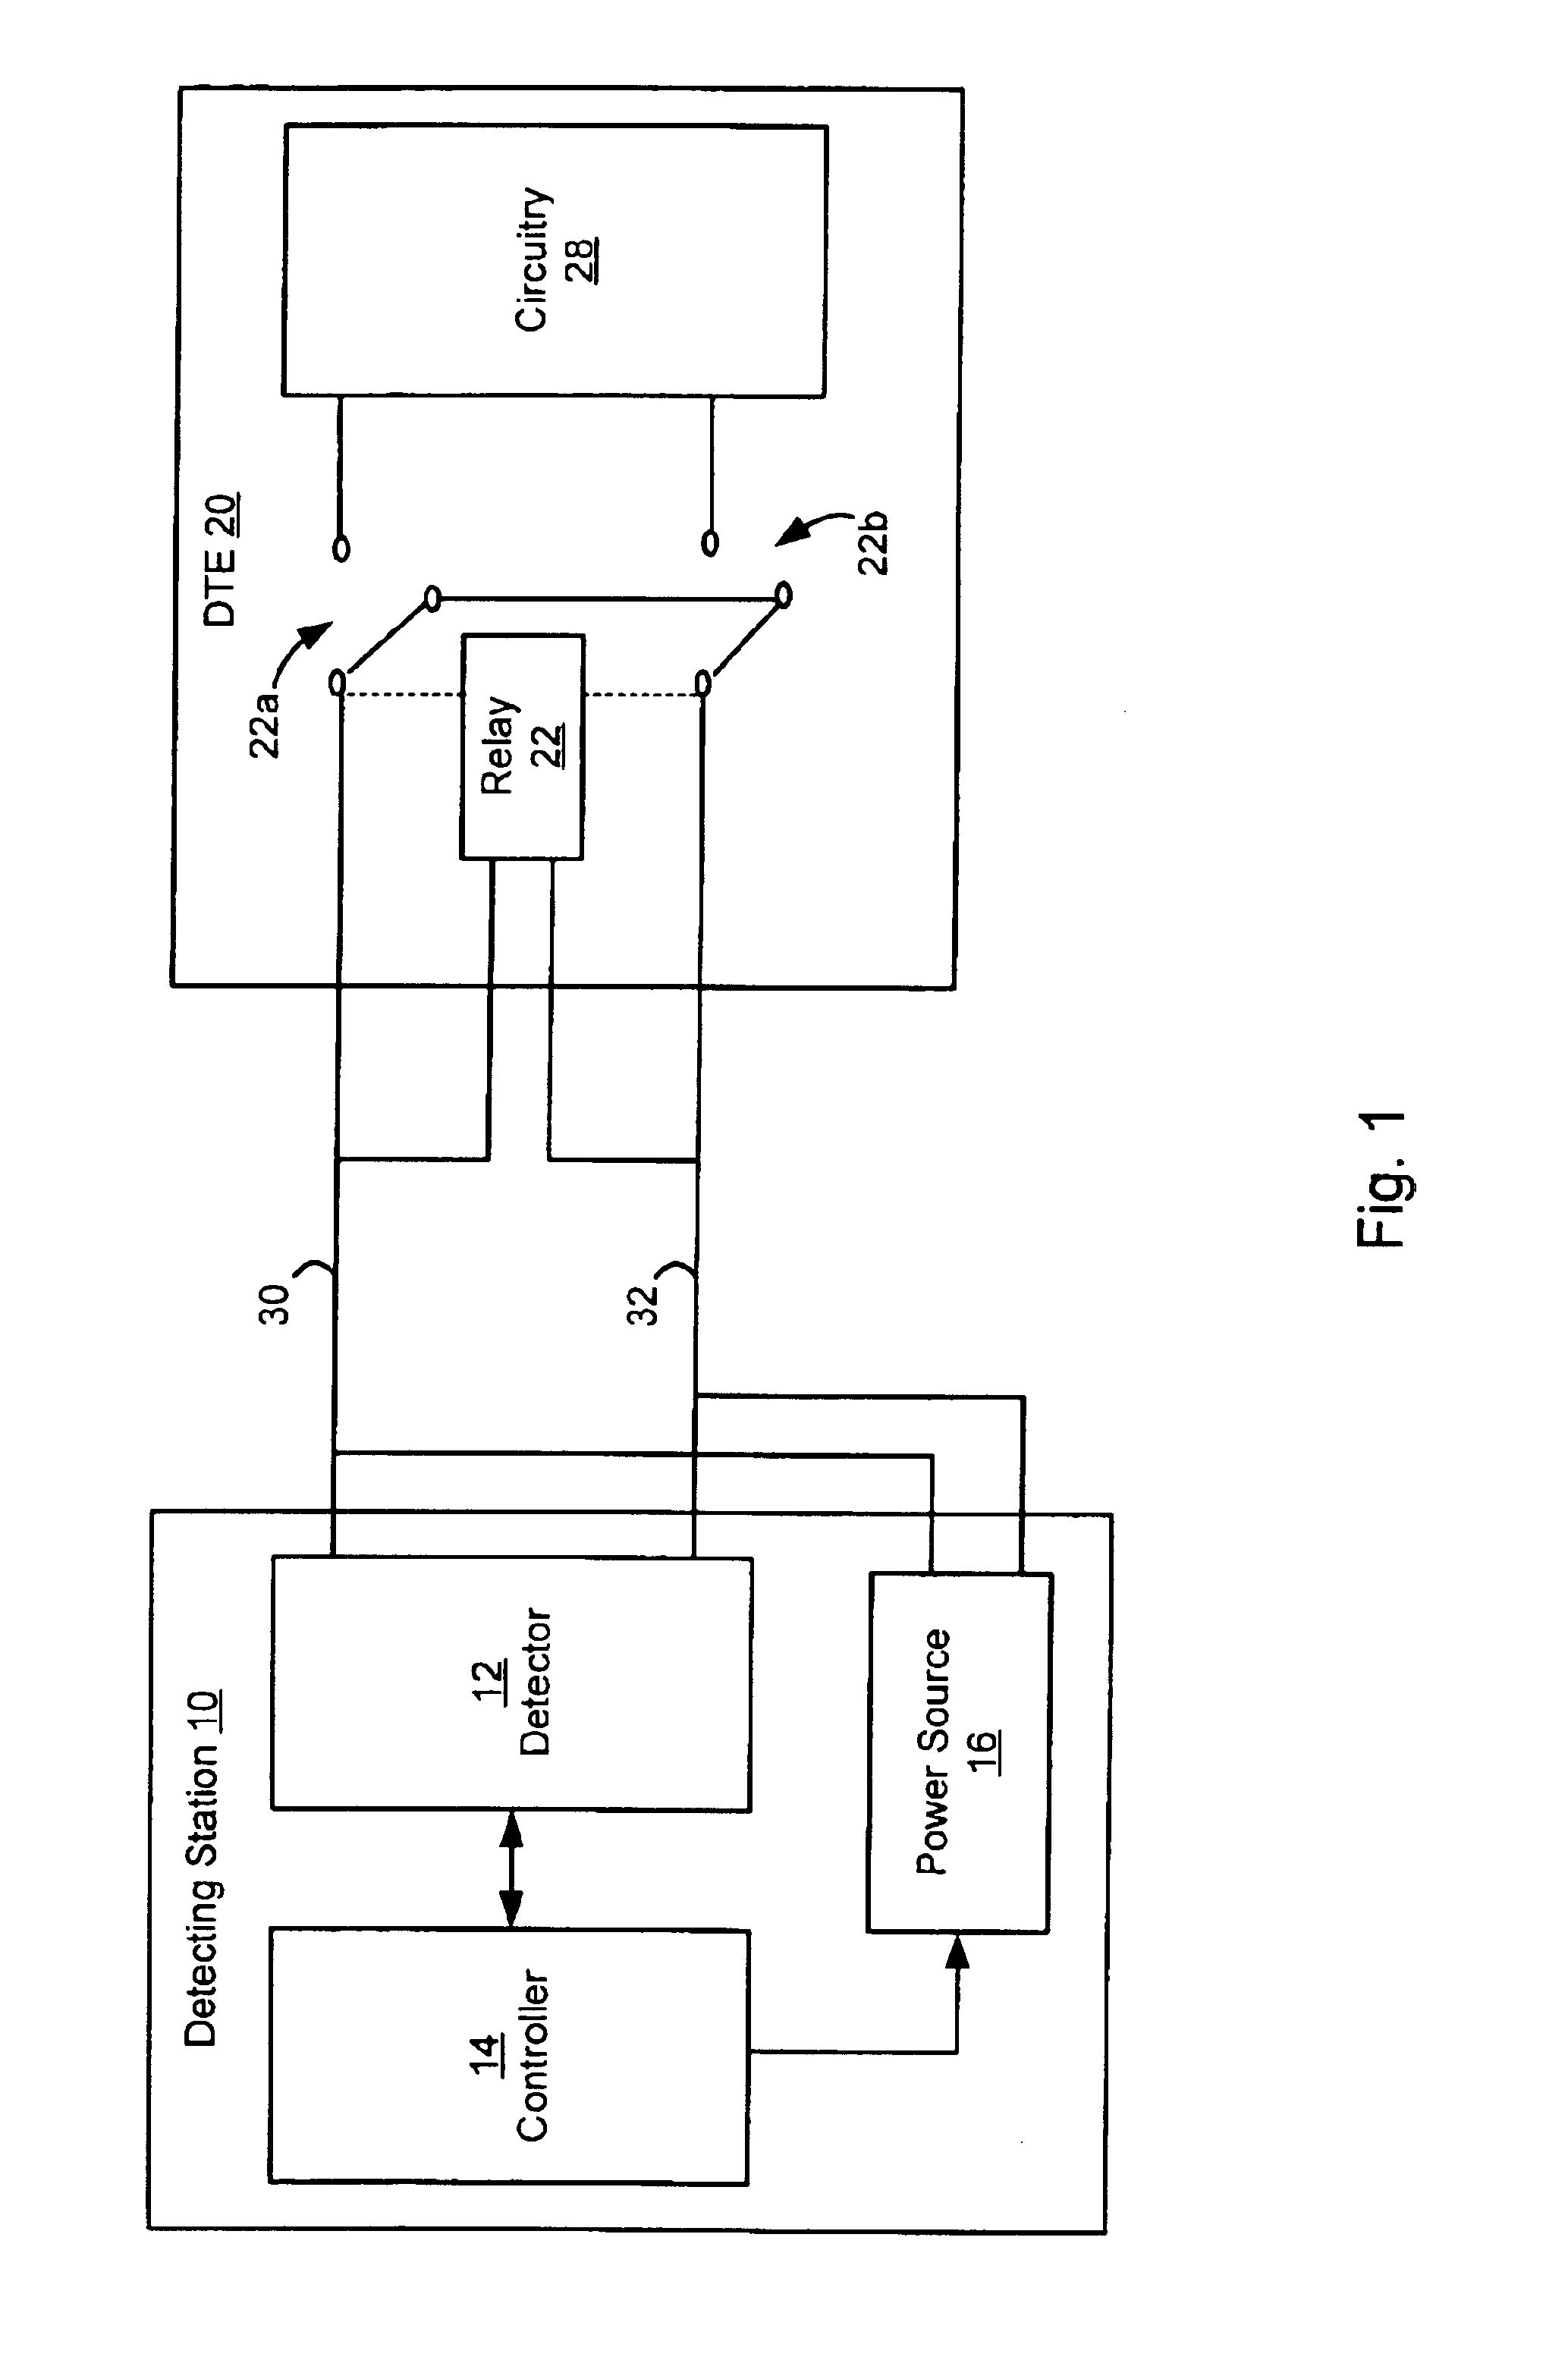 System and method for detecting a device requiring power